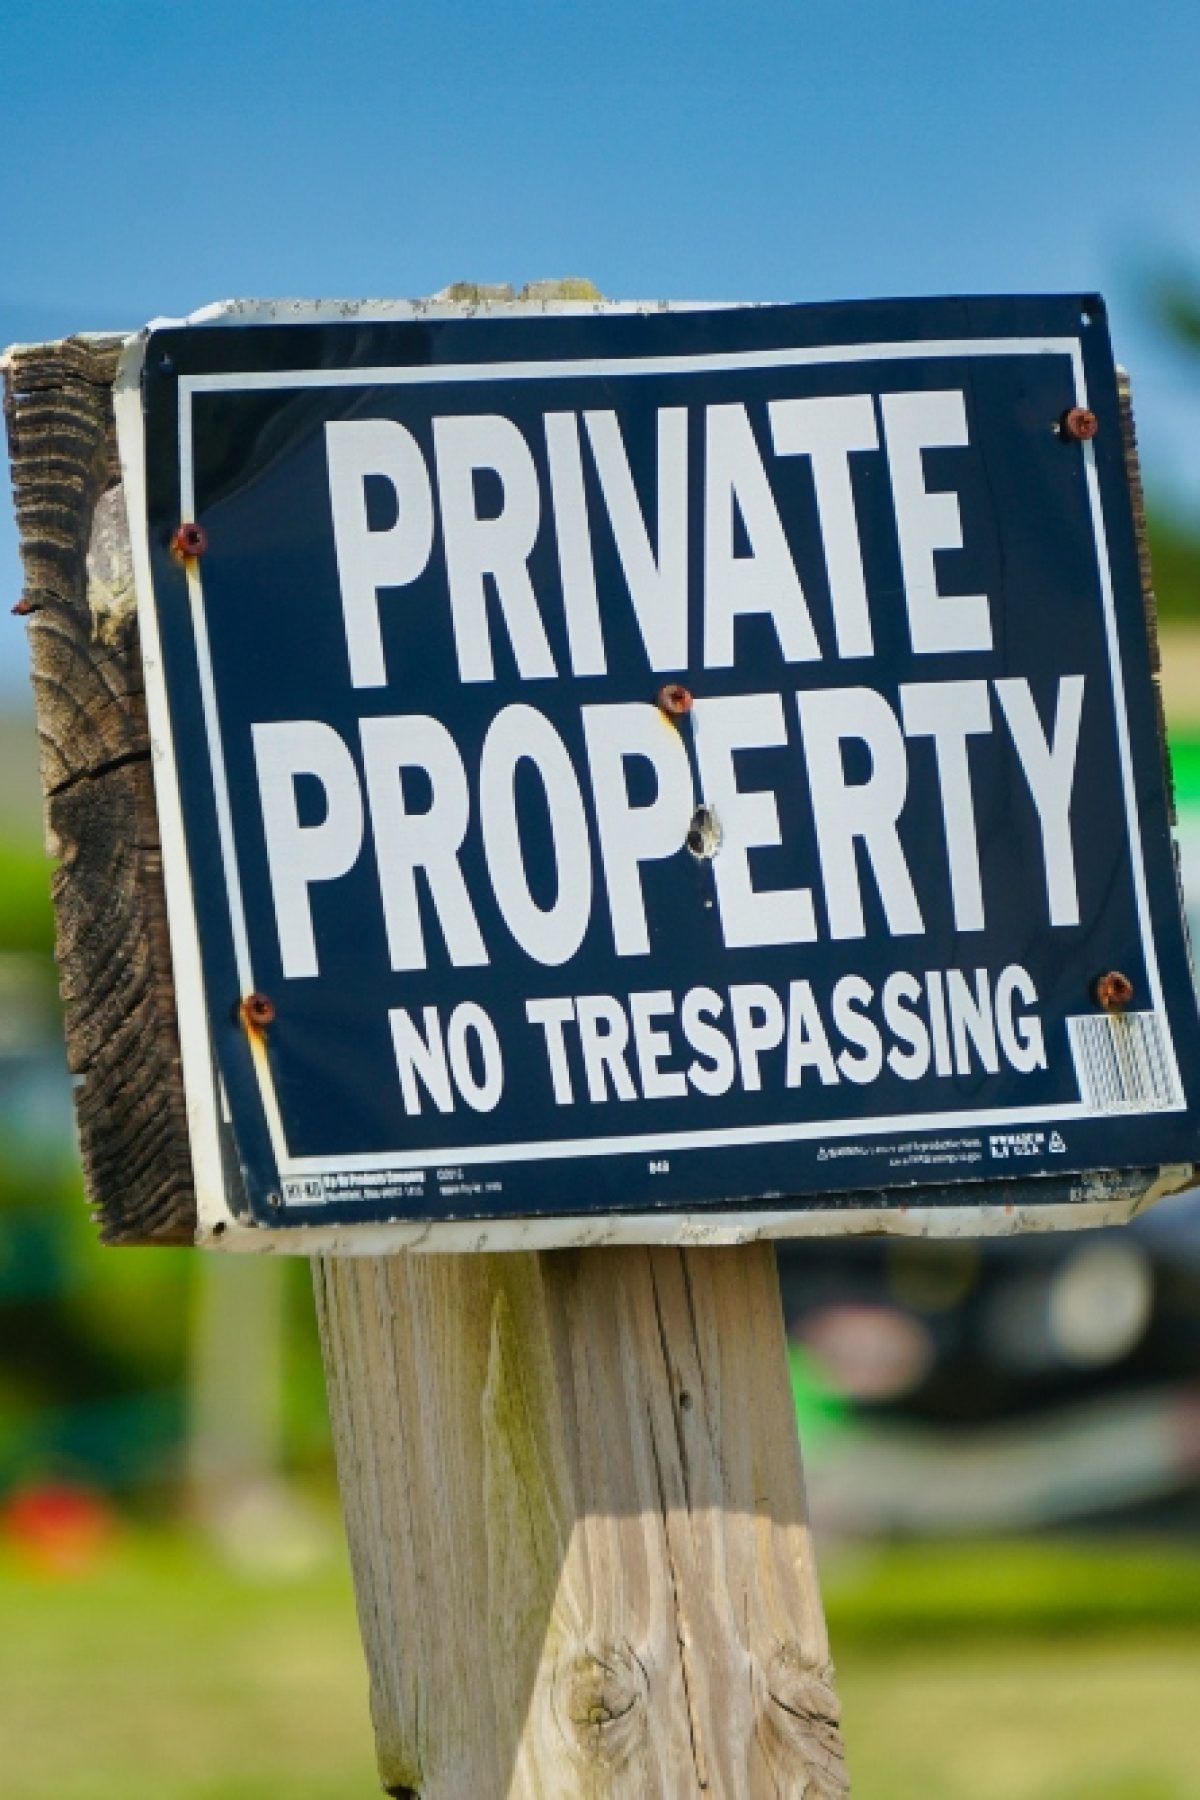 An image of a "private property" sign to prevent trespassers.